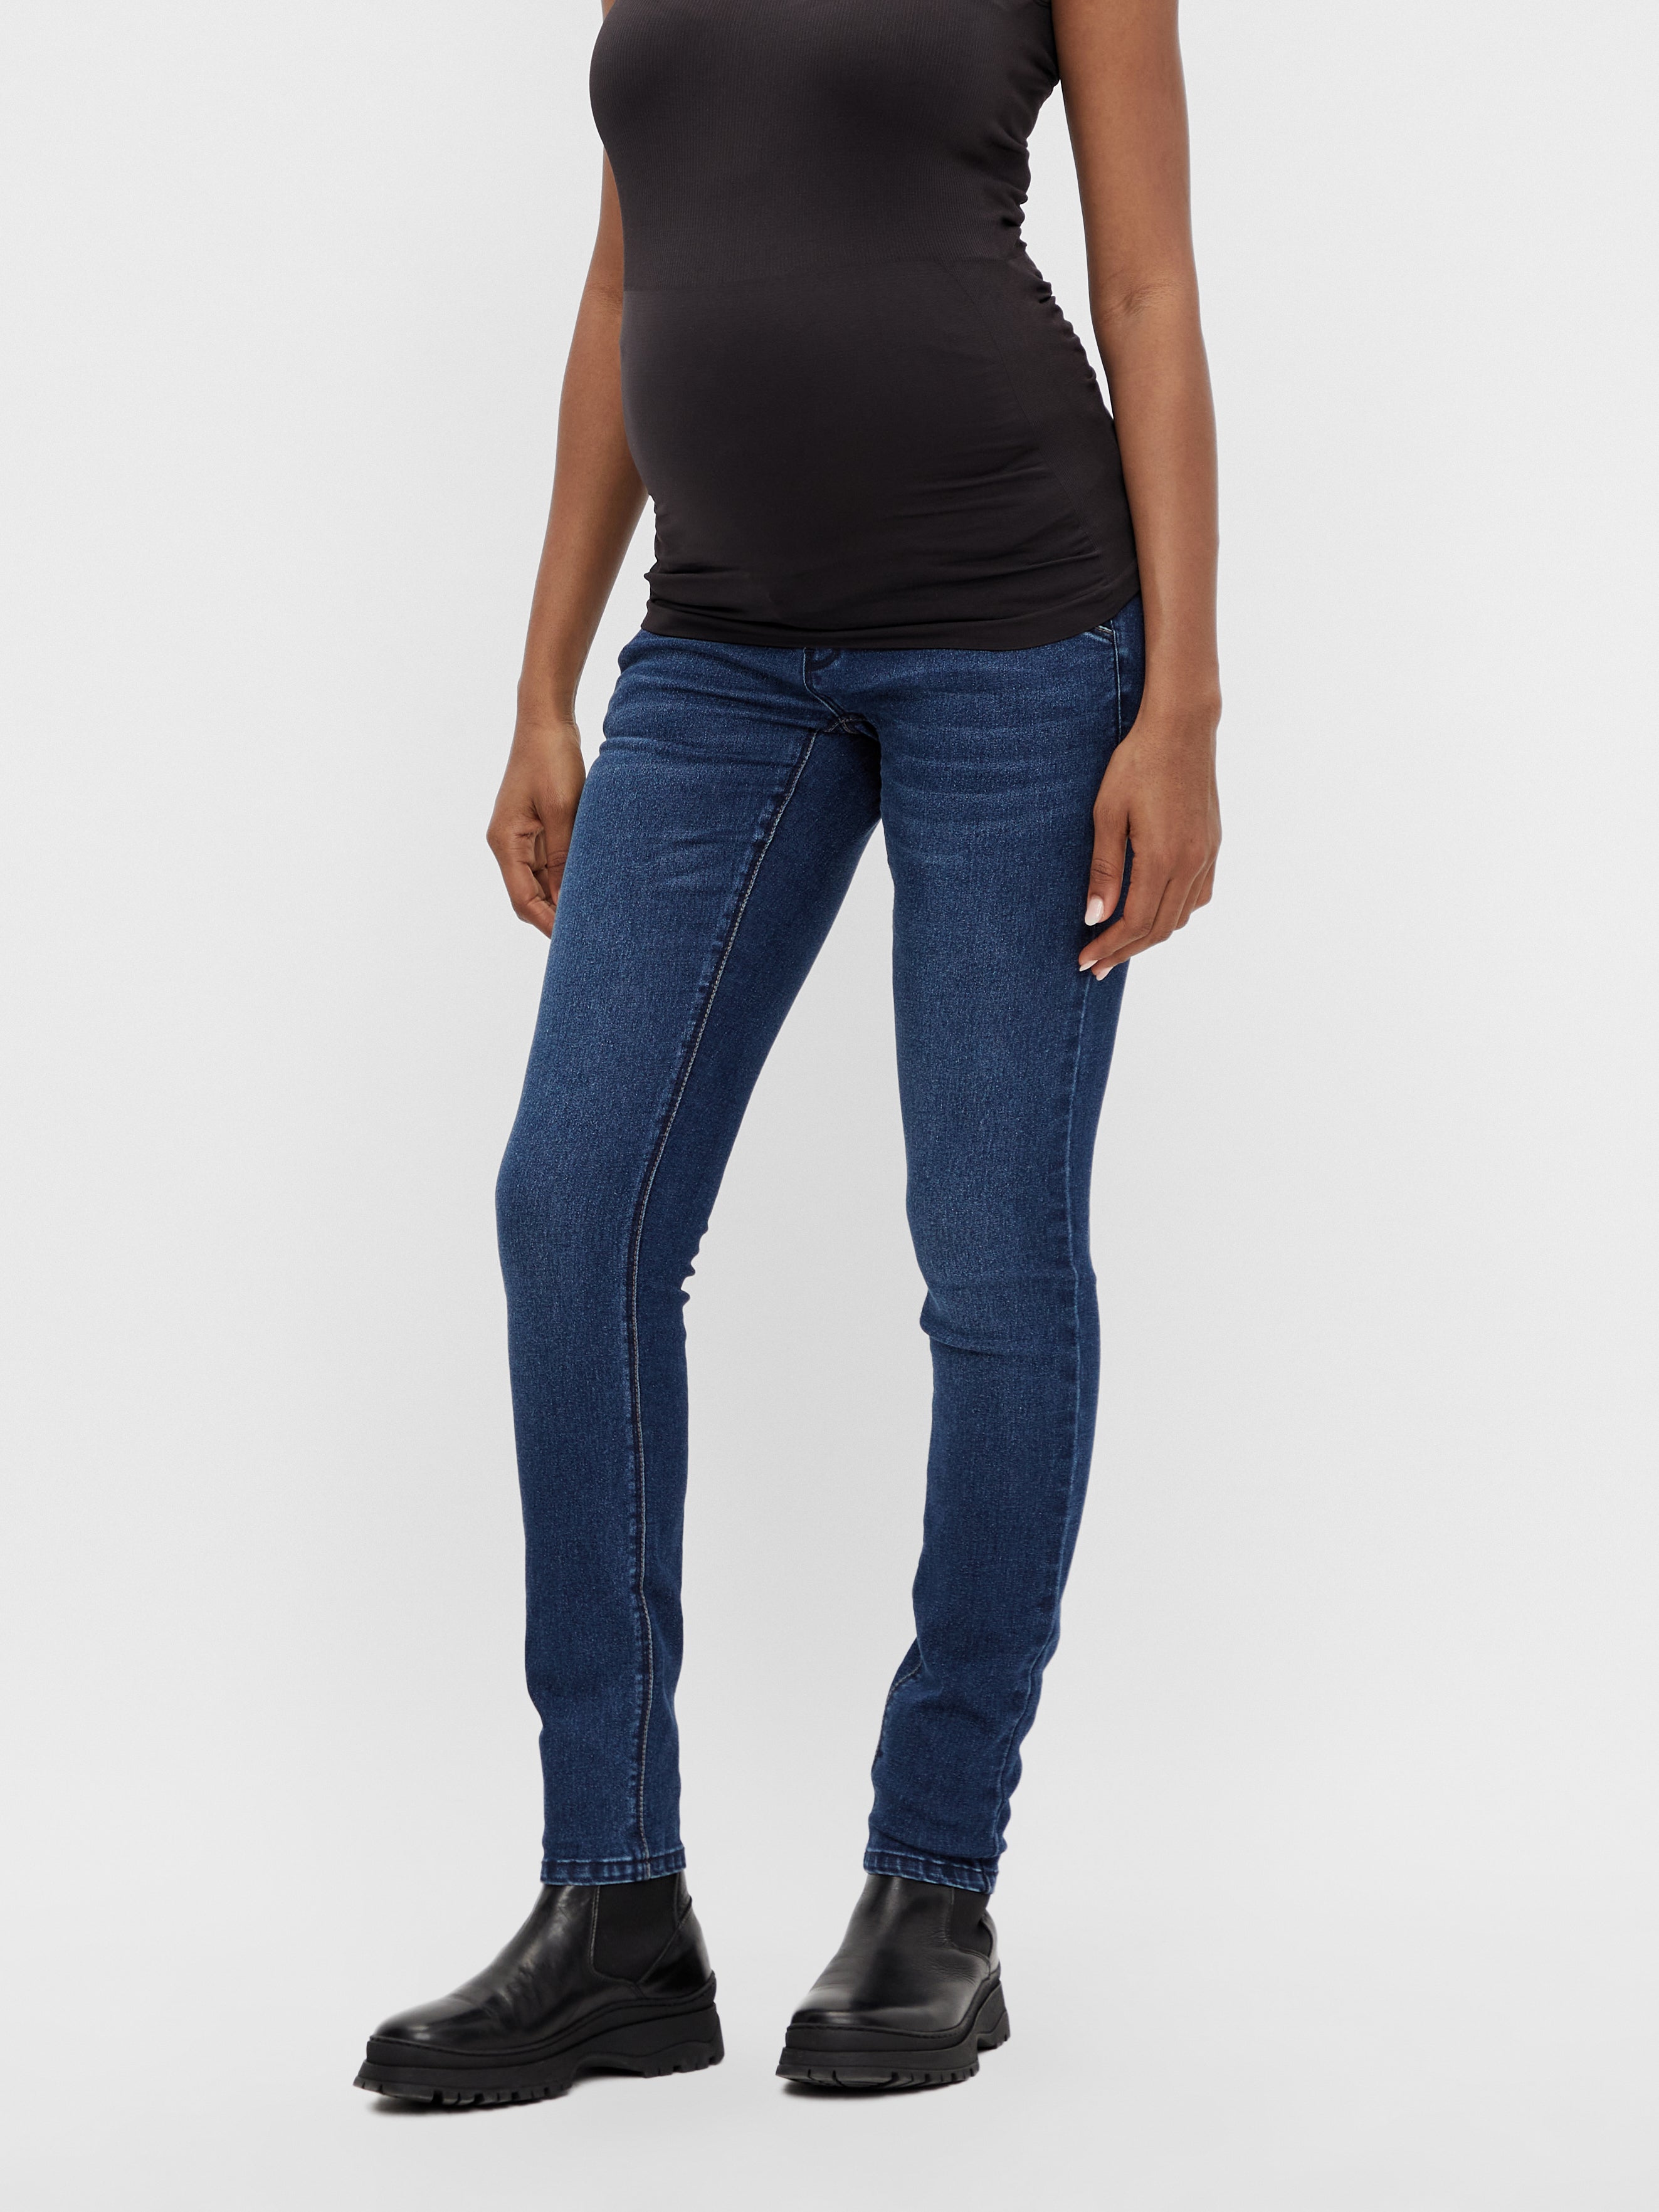 Fit discount! 20% Jeans Slim with